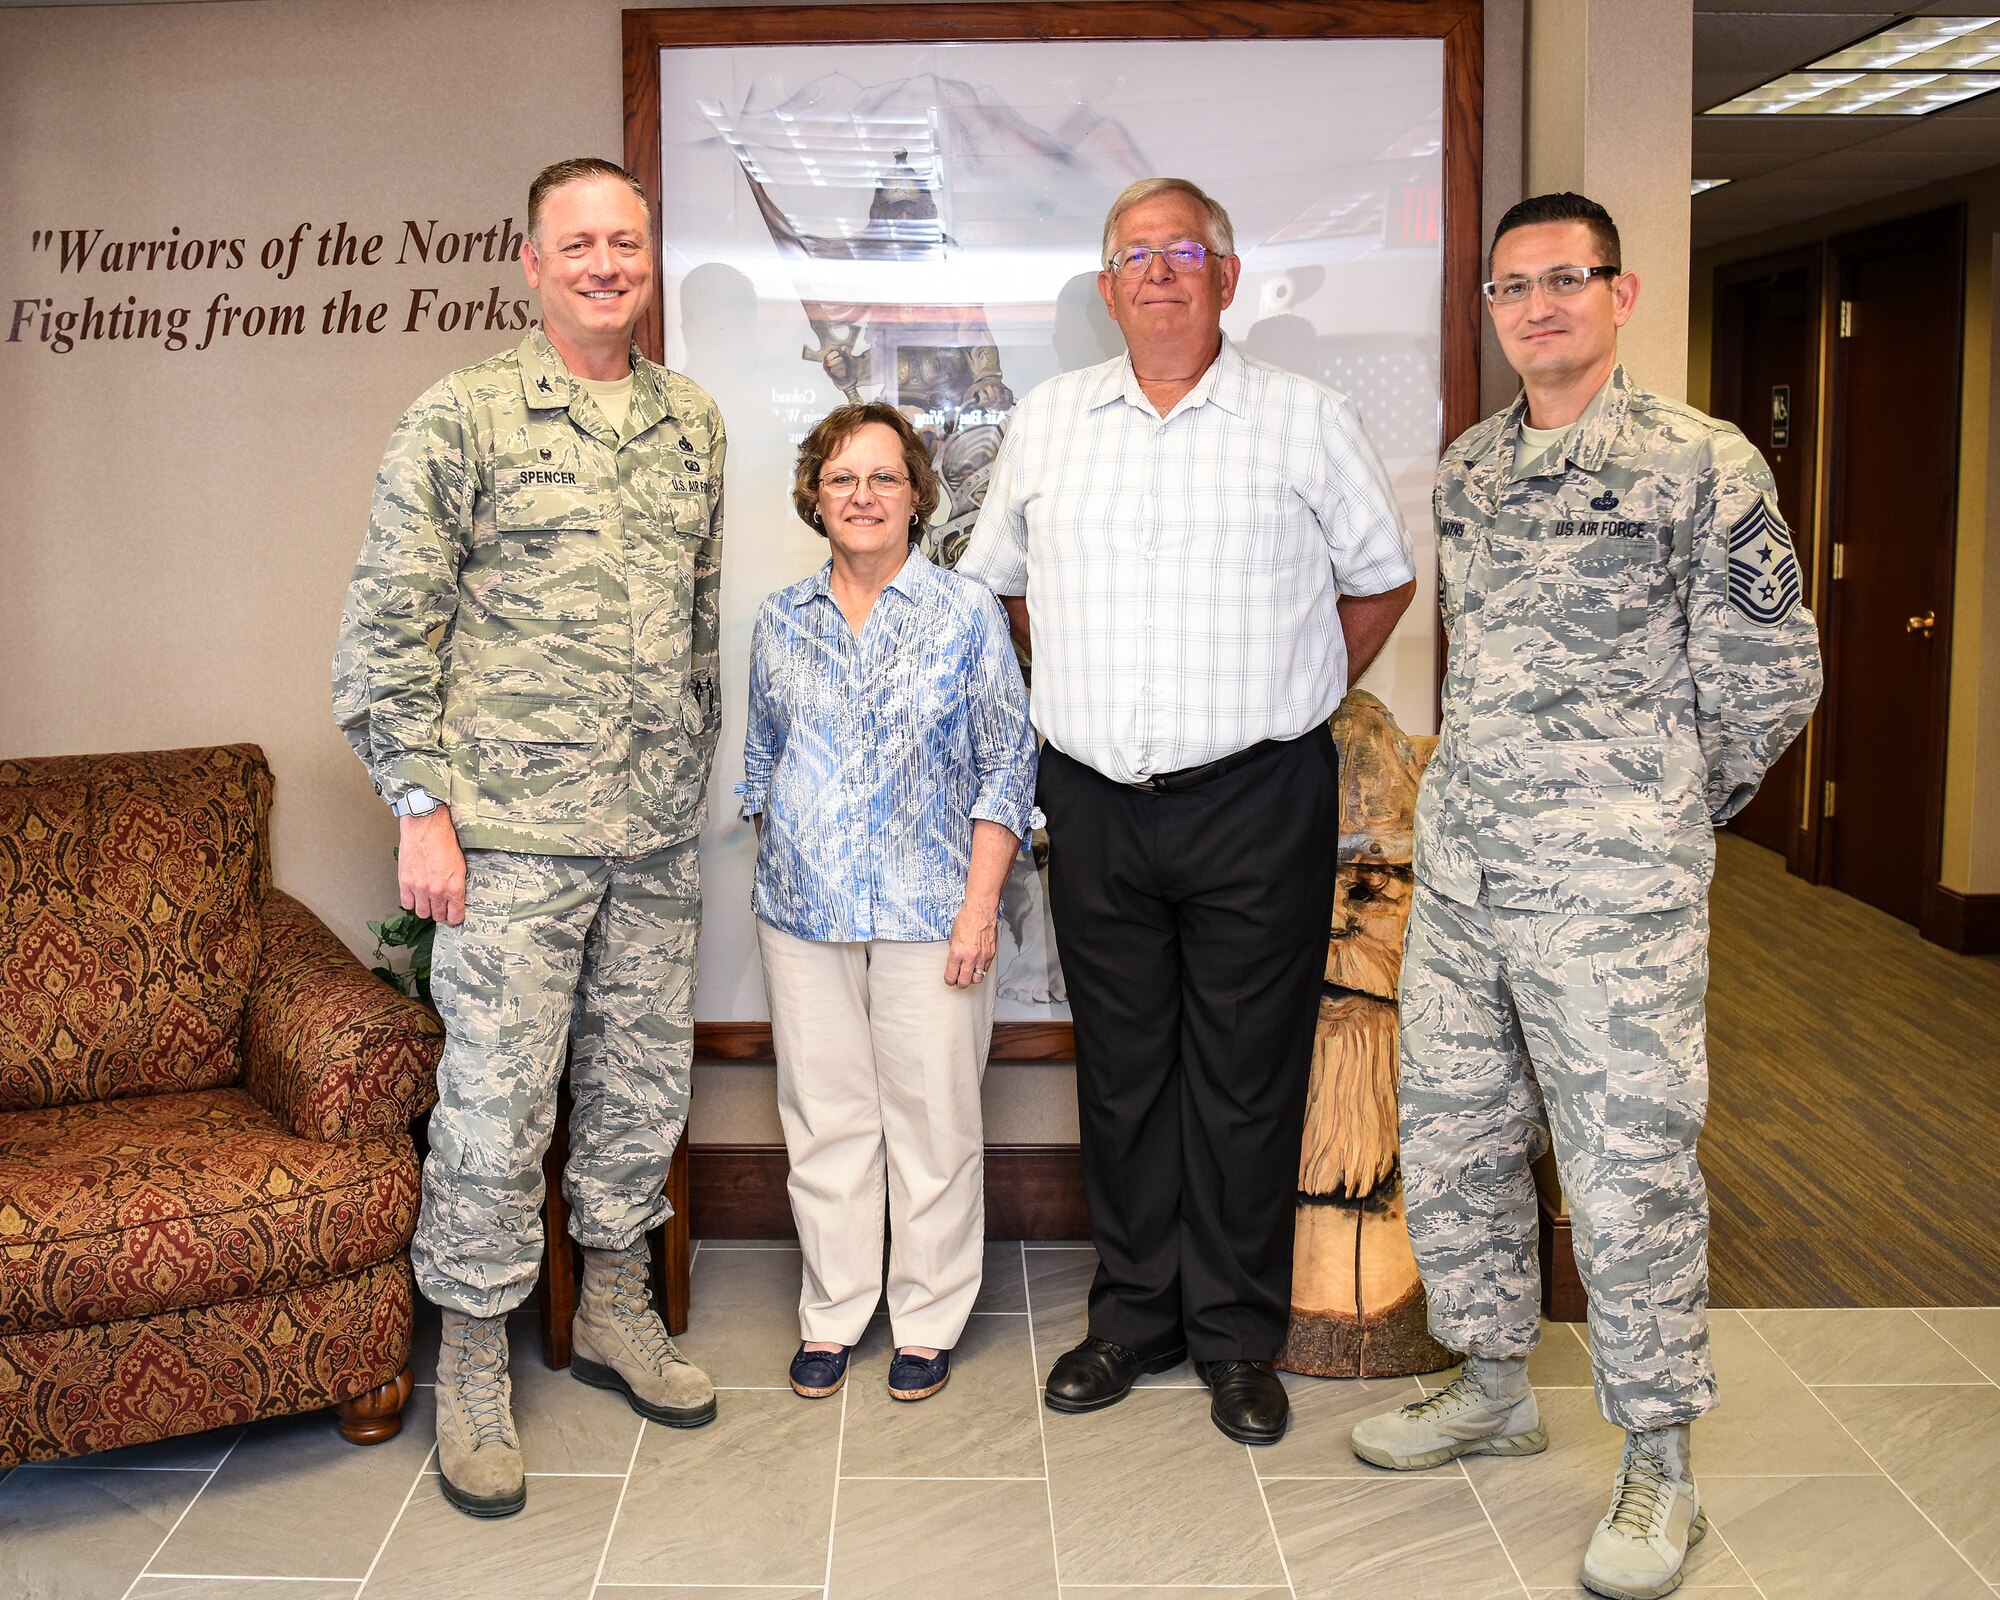 Col. Benjamin Spencer, 319th Air Base Wing commander, and CMSgt Ryan Thuyns, 319 ABW command chief, recognize Patricia Wacek, Gold Star Family Member, and Kevin Wacek, her spouse, June 7, 2019 during a tour at Grand Forks Air Force Base, North Dakota. Gold Star Family Members are immediate family members of service members who were killed in combat, through an act of terrorism, declared missing in action or a prisoner war. (U.S. Air Force photo by Senior Airman Elijaih Tiggs)